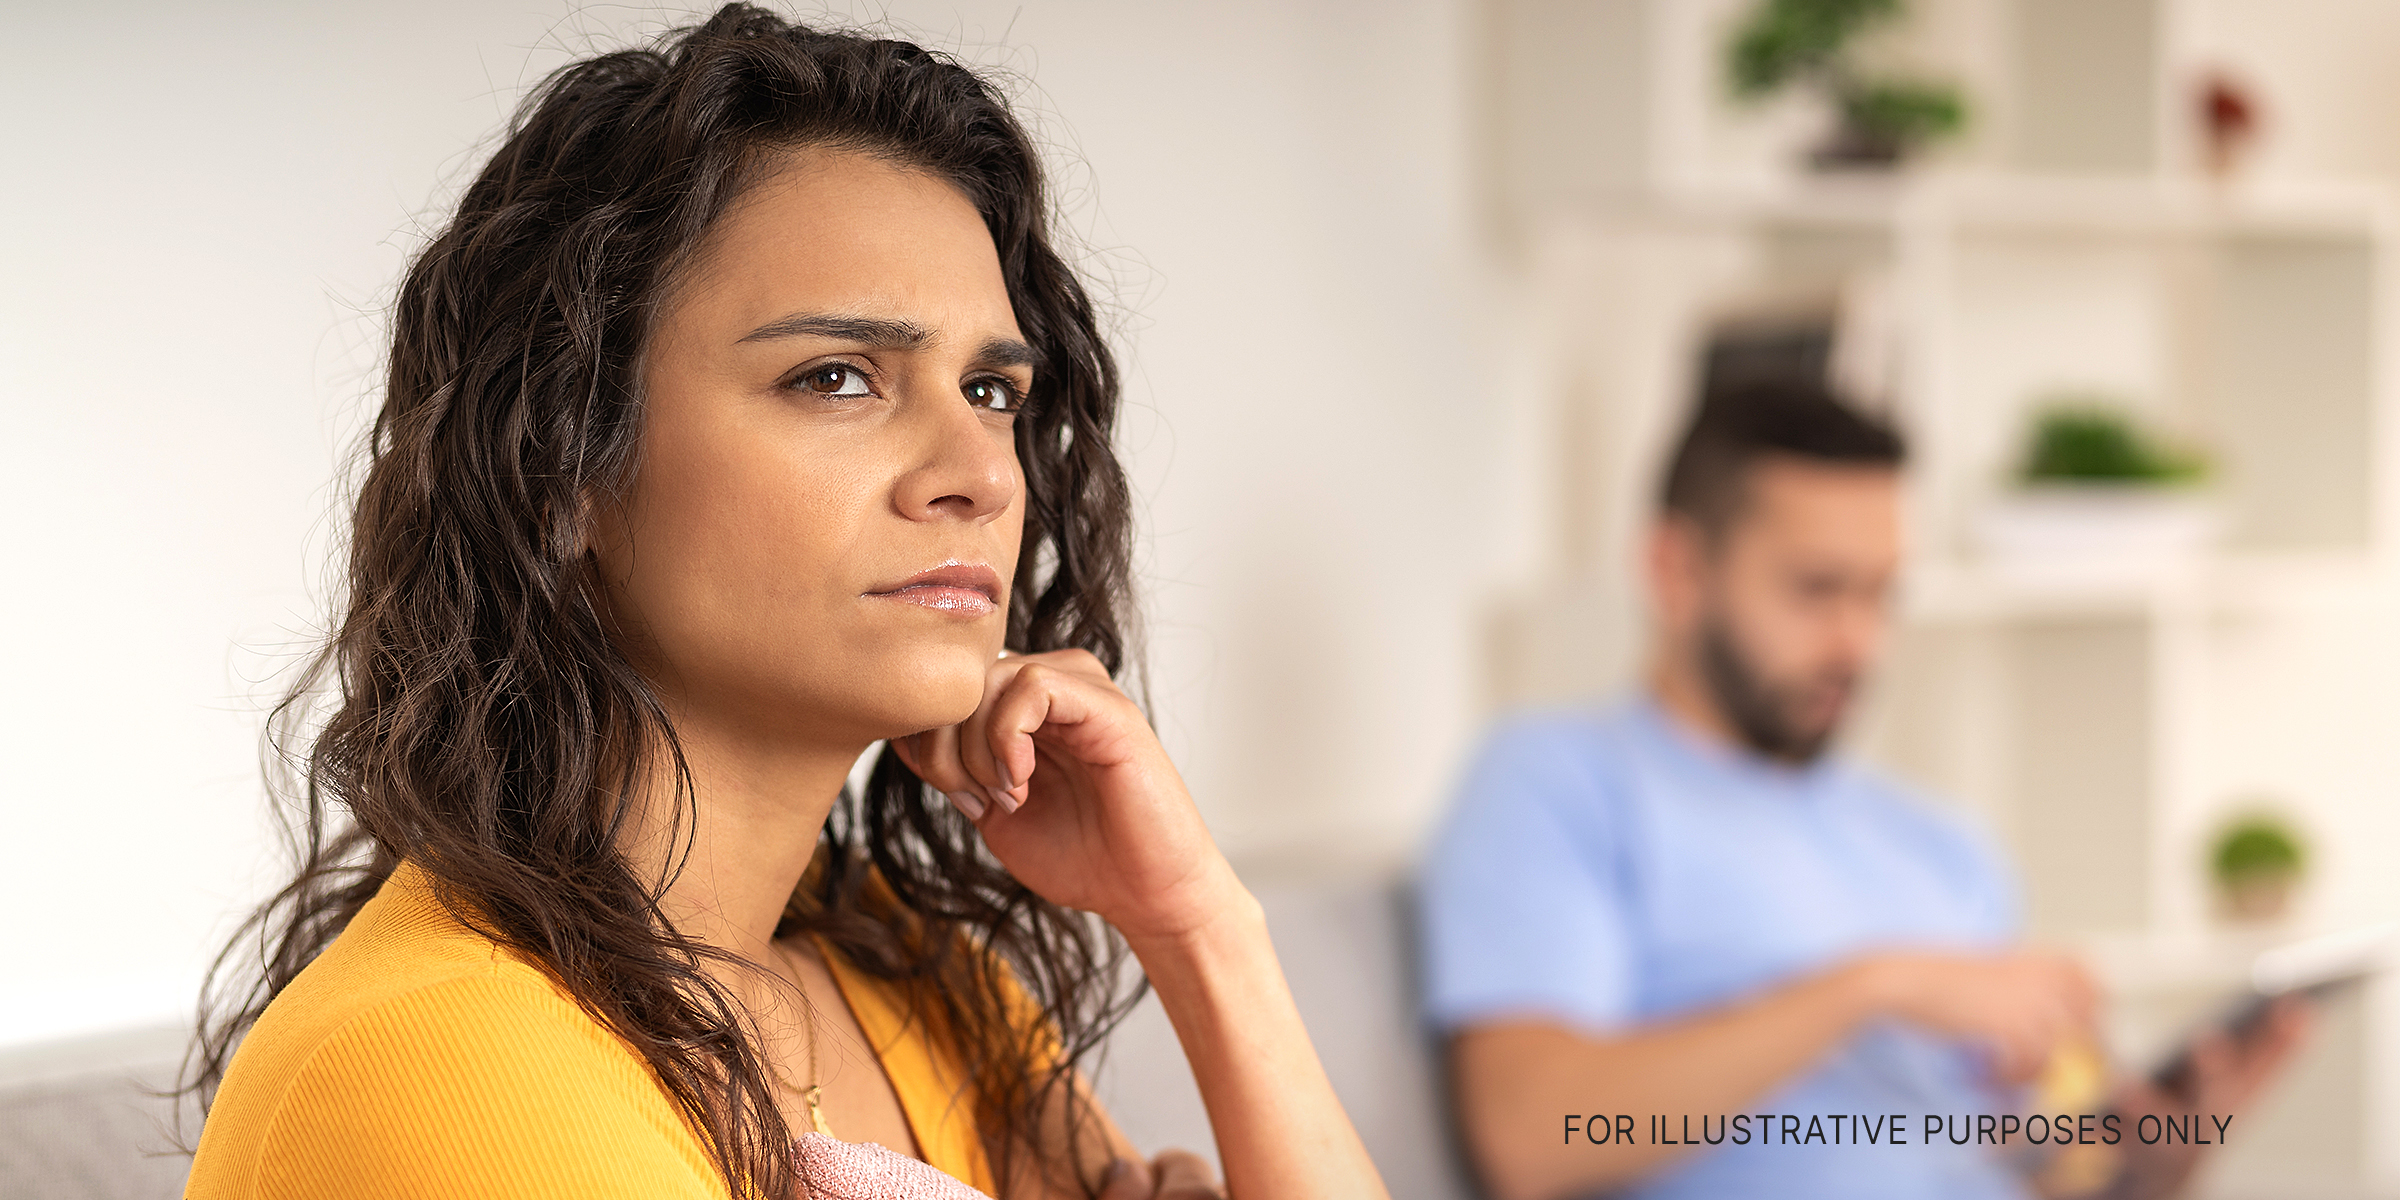 A worried woman looking away from her husband | Source: Shutterstock